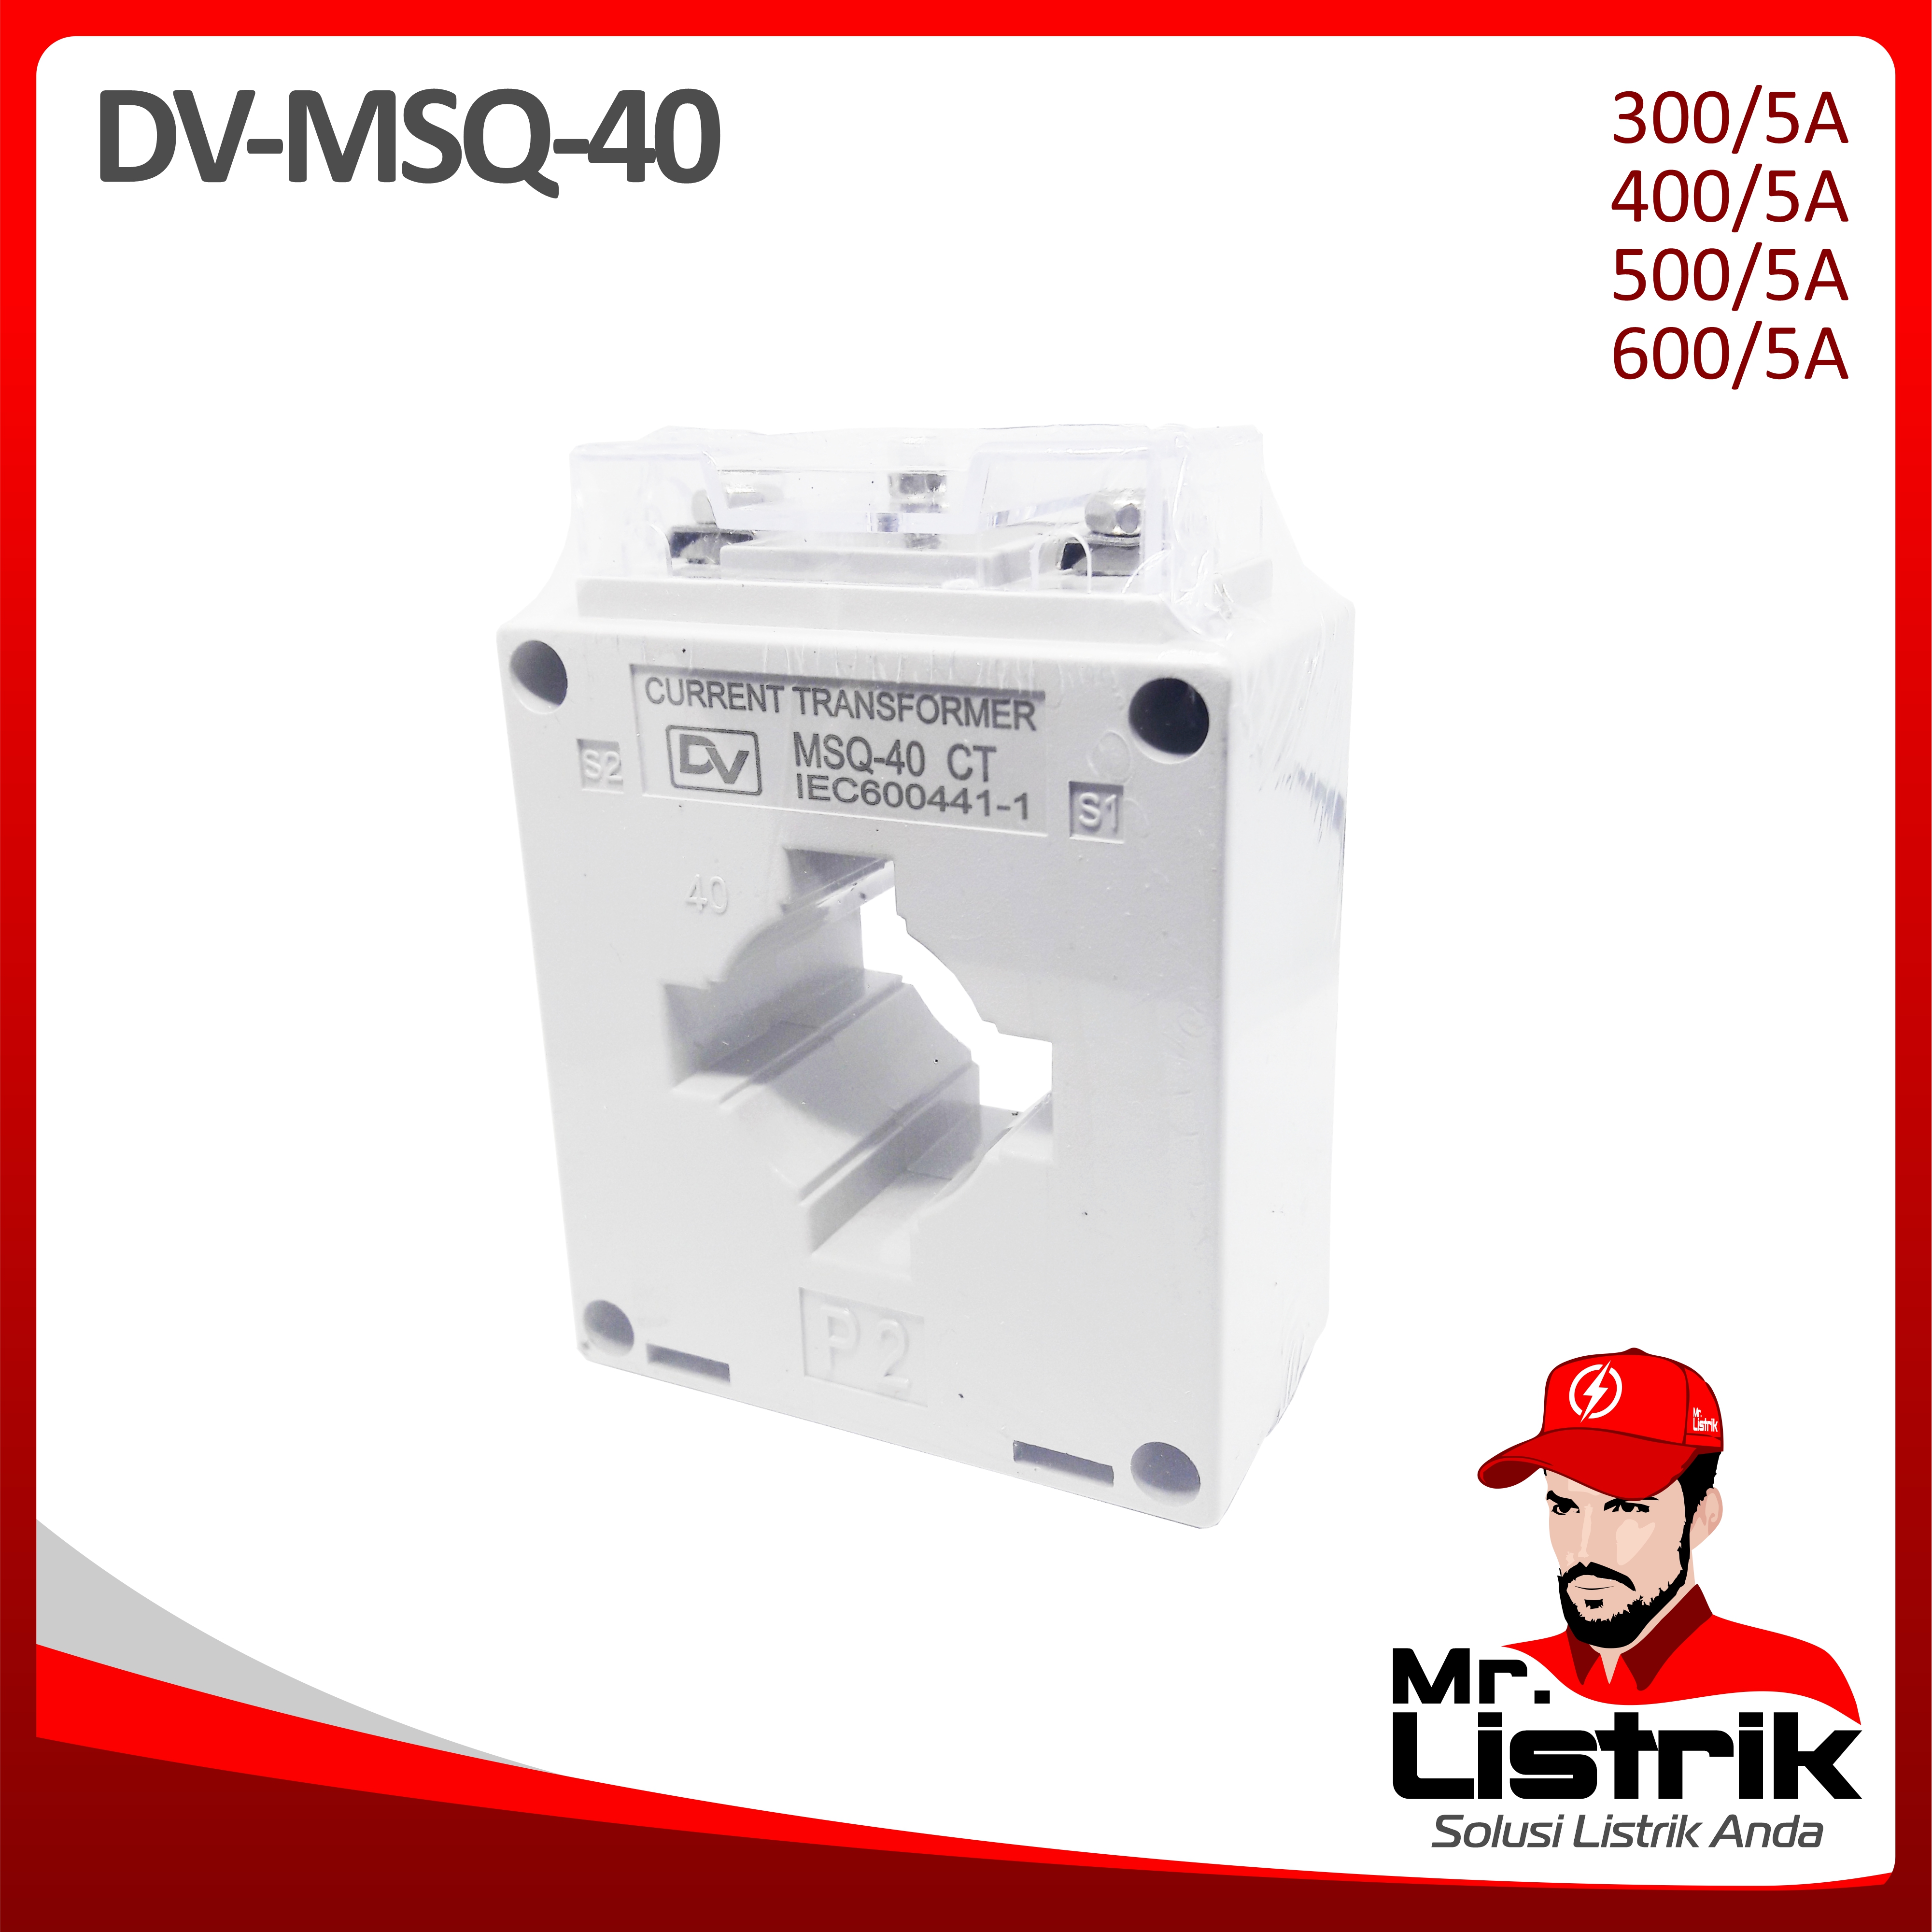 Current Transformer DV Fixed Type MSQ-40 400/5A